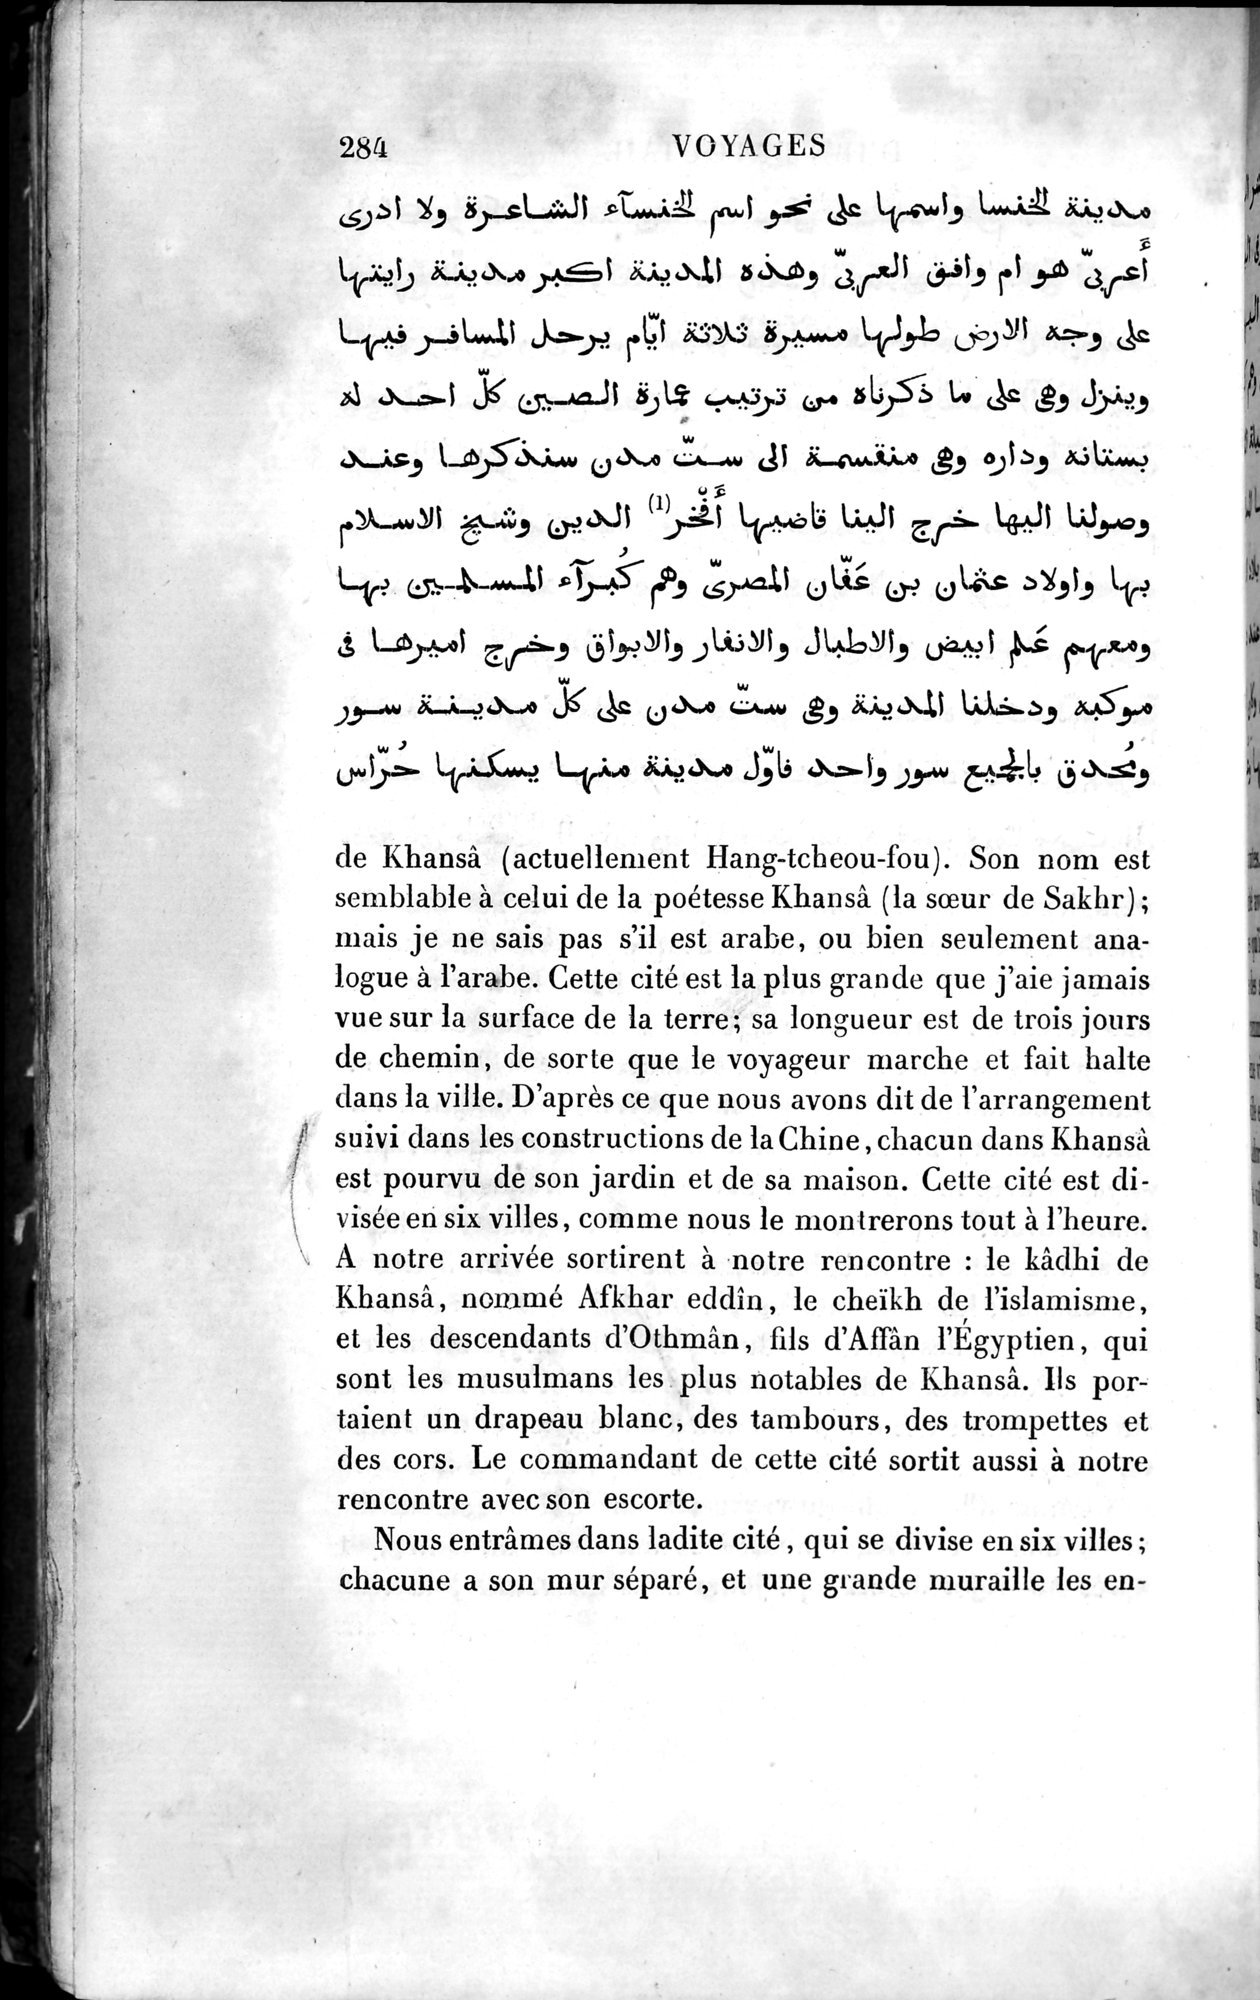 Voyages d'Ibn Batoutah : vol.4 / Page 296 (Grayscale High Resolution Image)